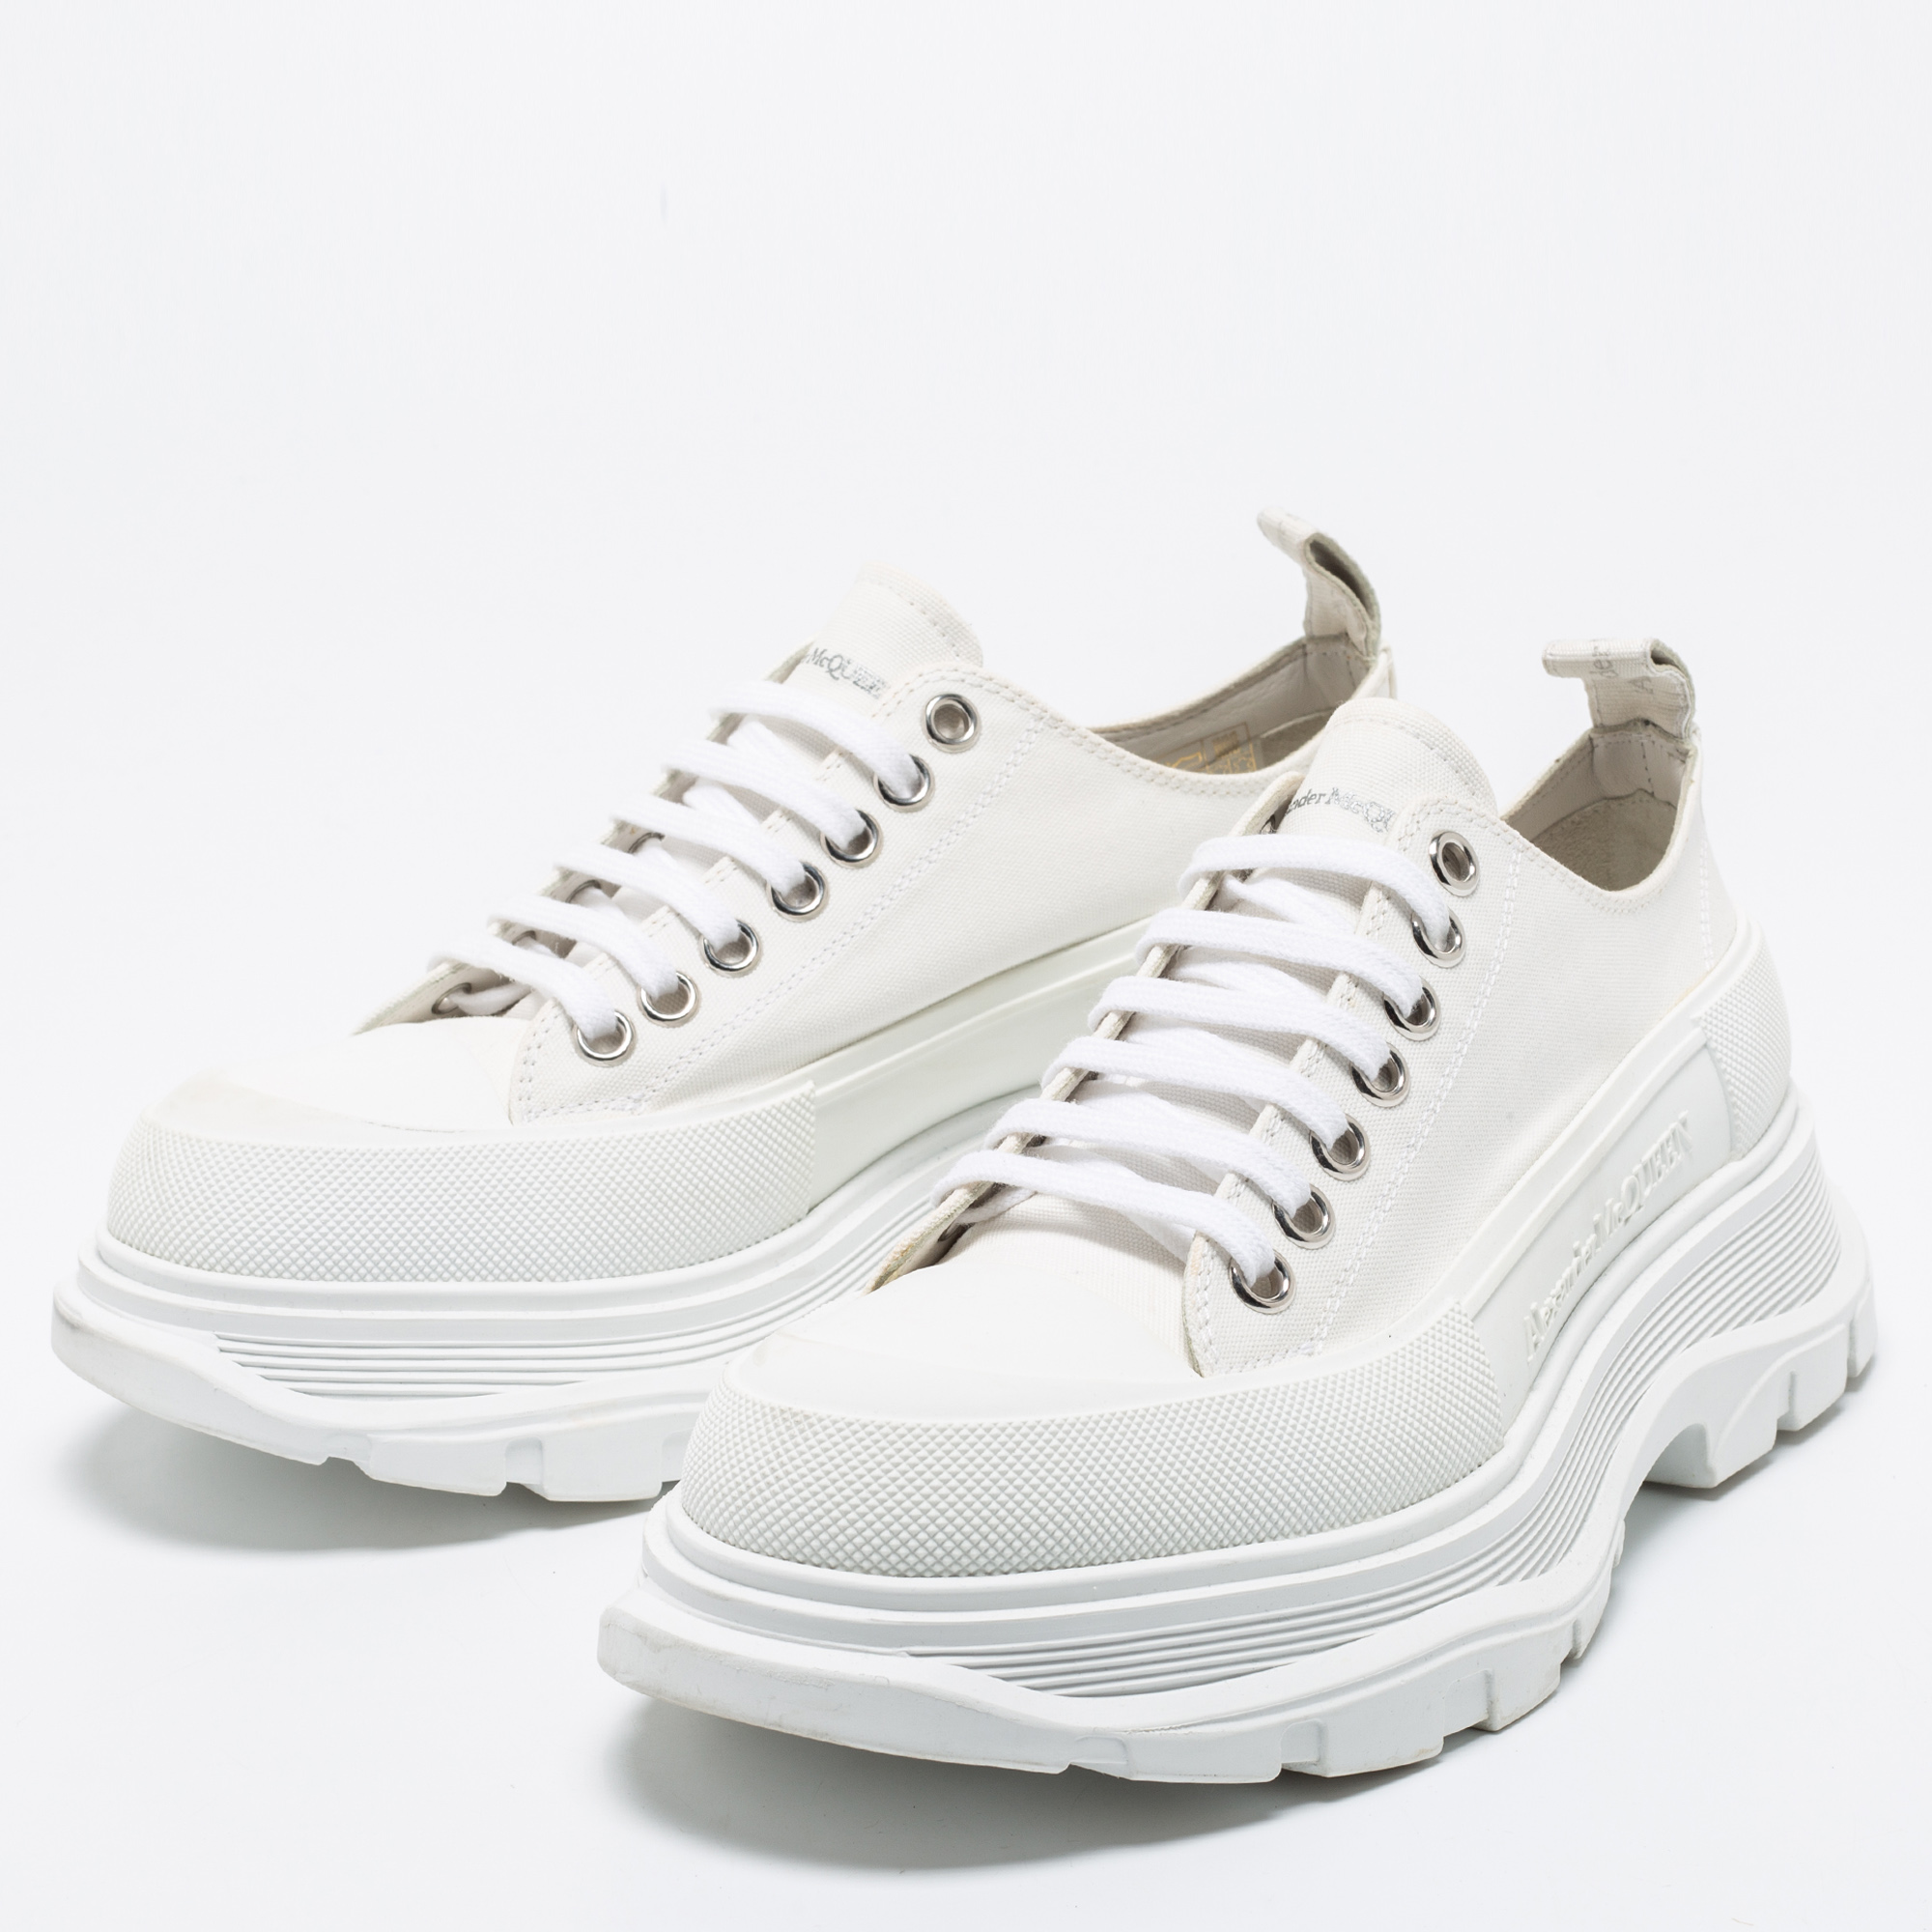 

Alexander Mcqueen White Canvas Tread Slick Lace Up Sneakers